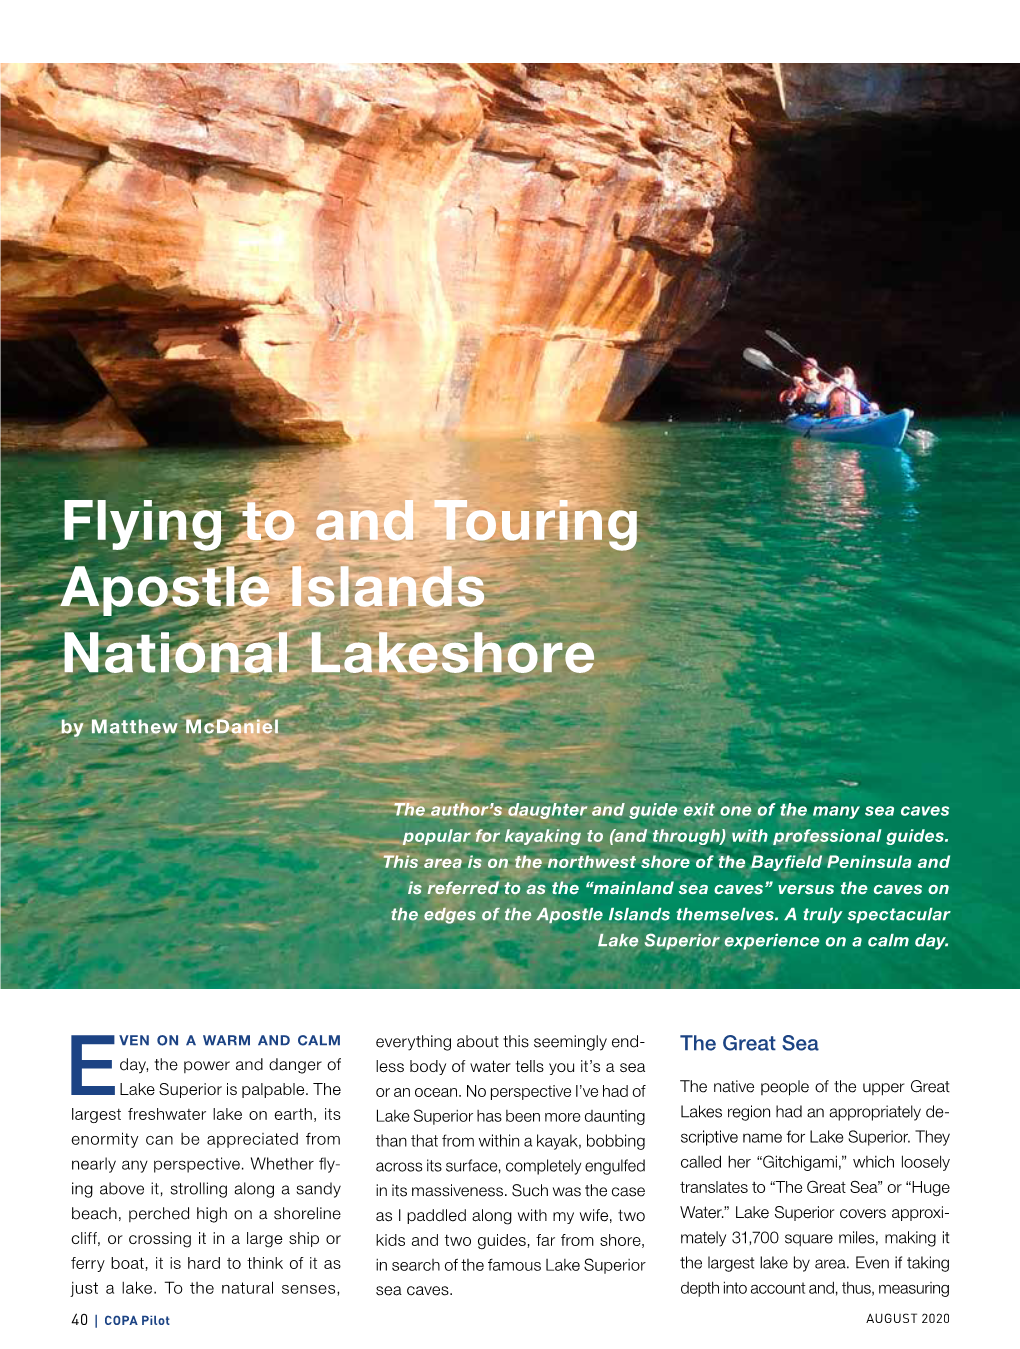 Flying to and Touring Apostle Islands National Lakeshore by Matthew Mcdaniel